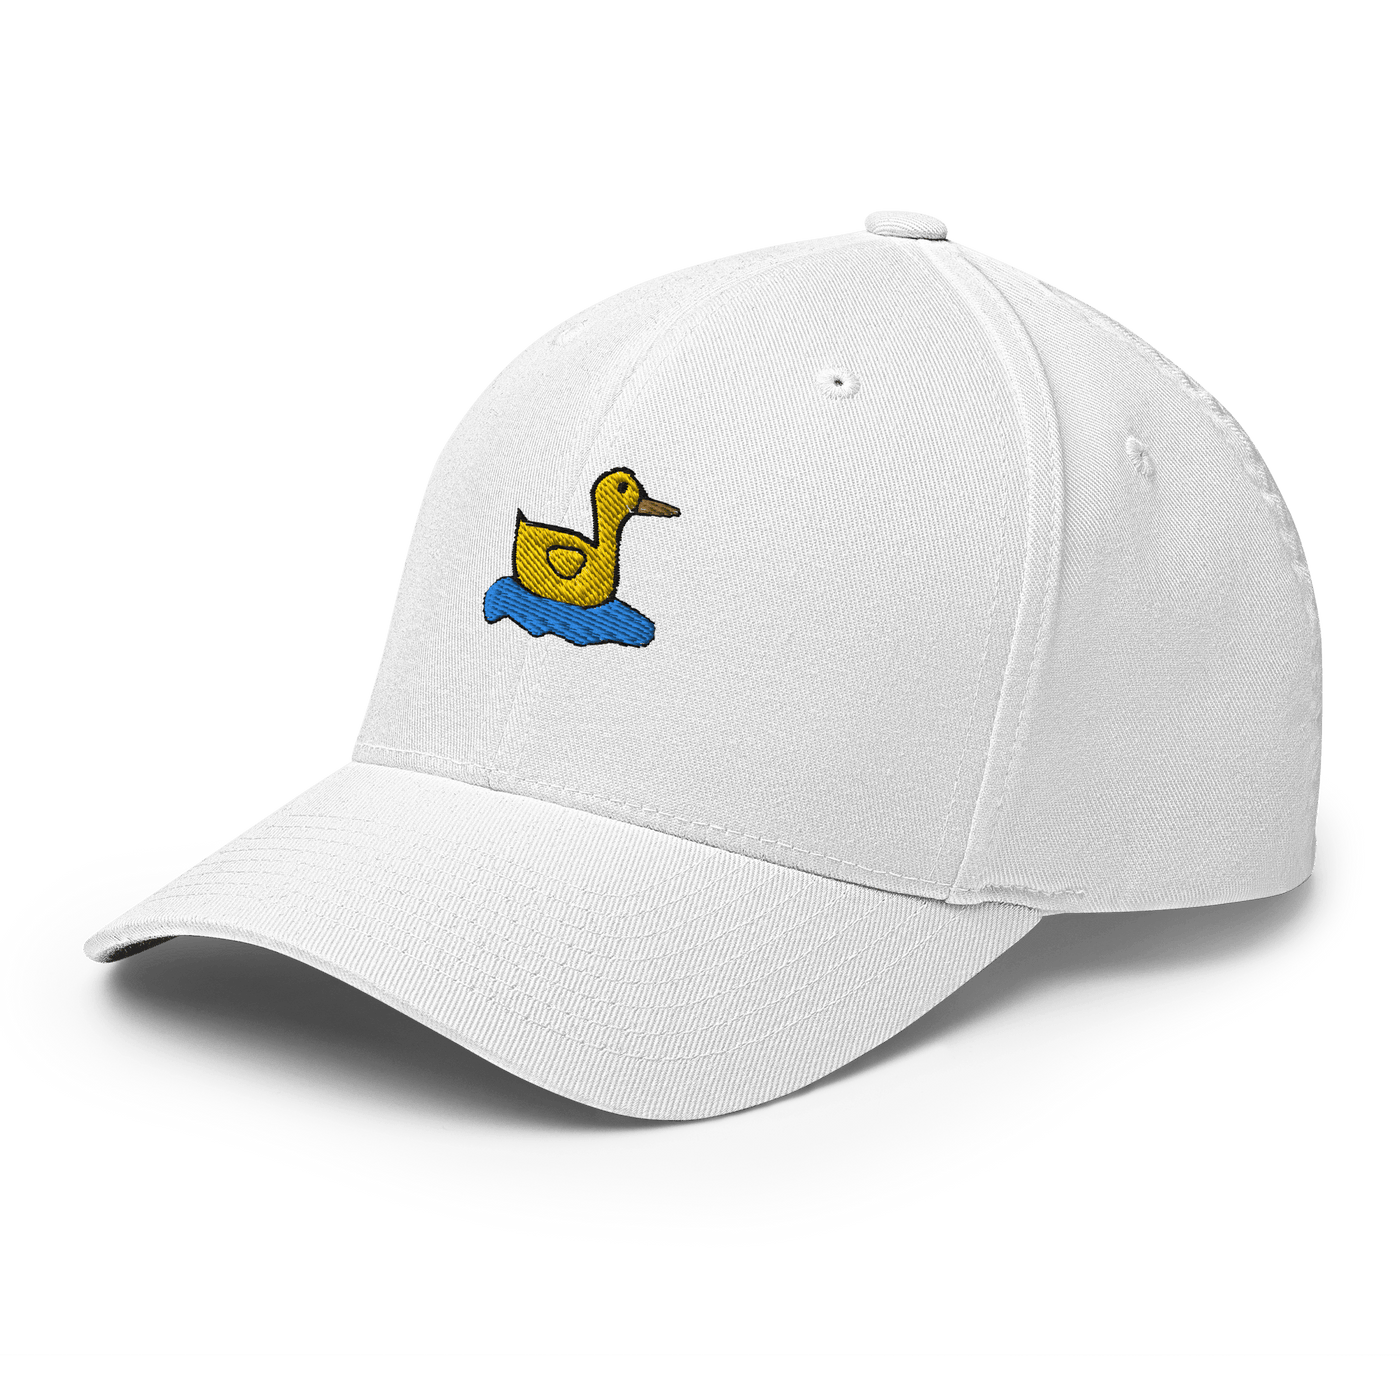 Lonely Duck Flexfit Cap - White - S/M - Just Another Cap Store